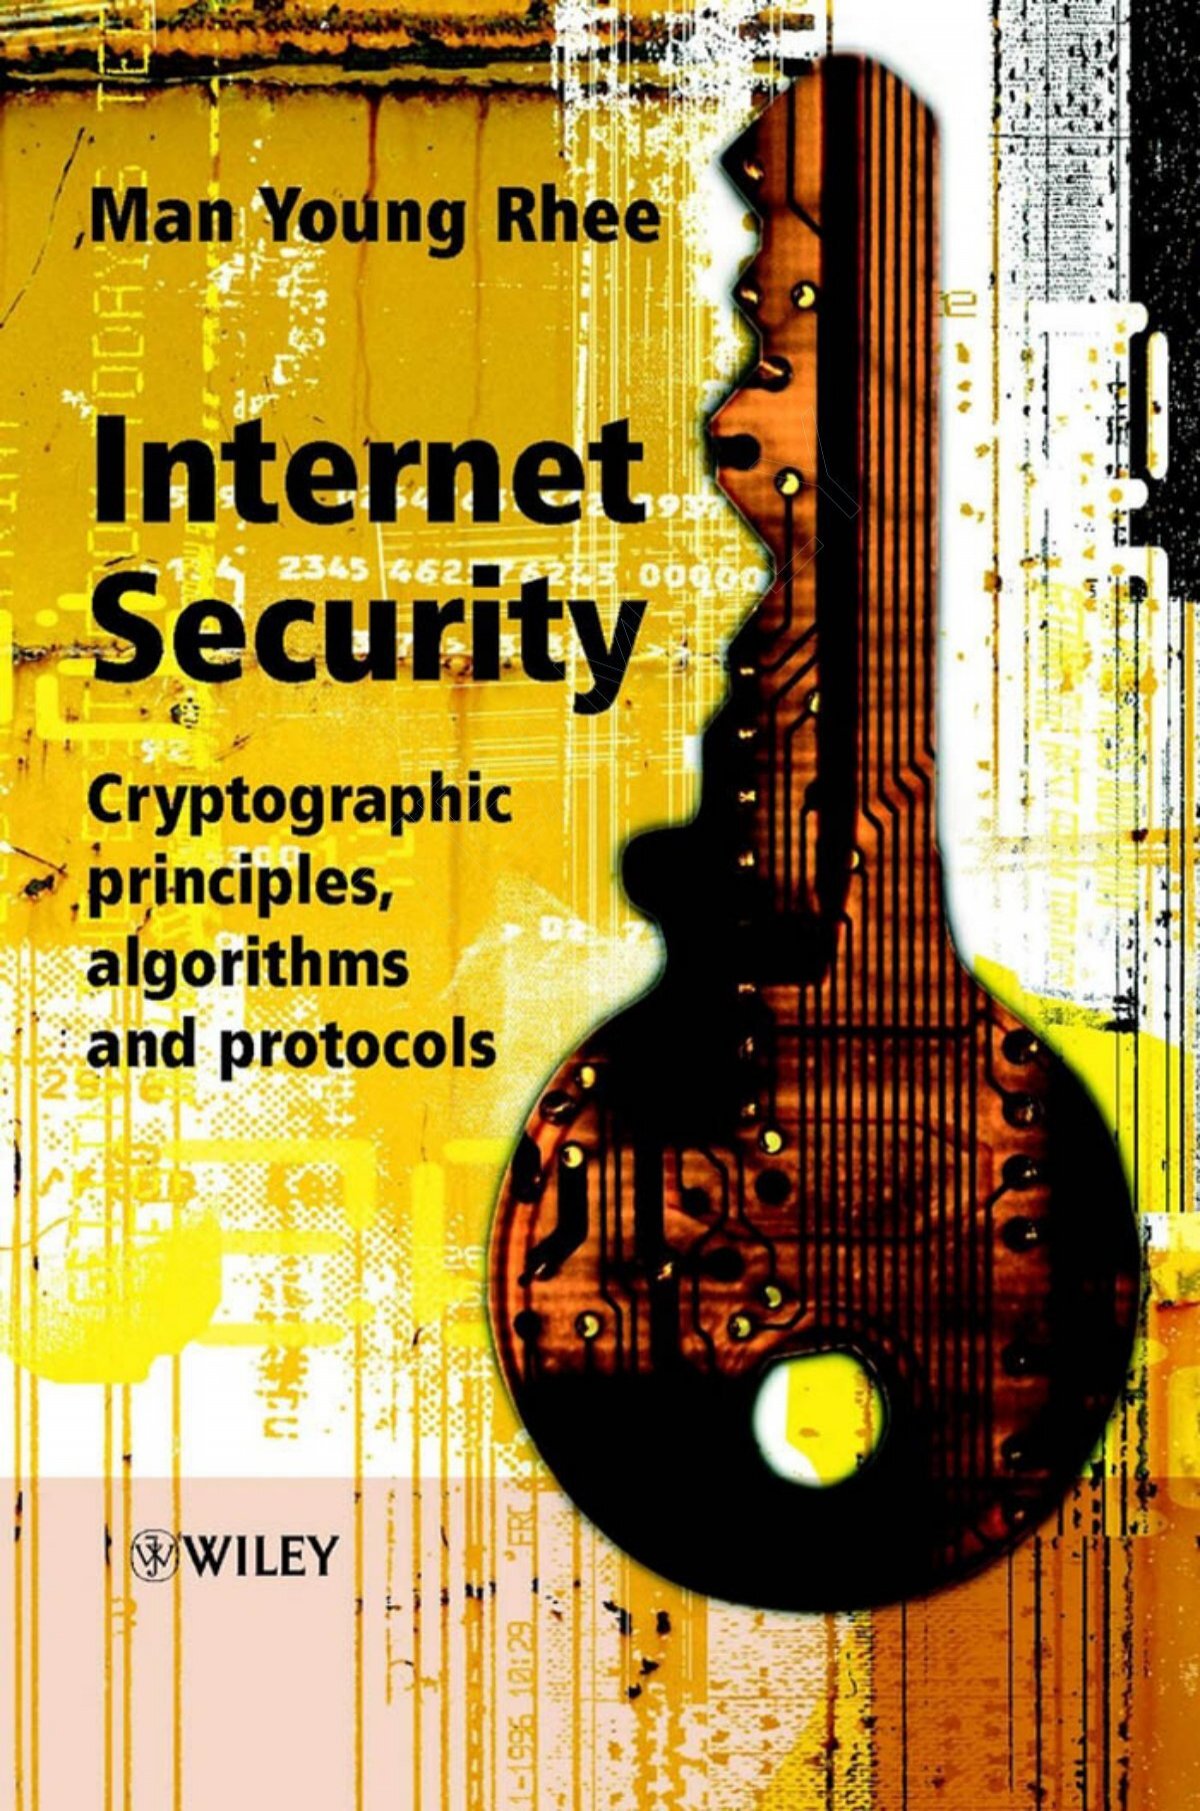 Internet Security - Dang Thanh Binh's Page